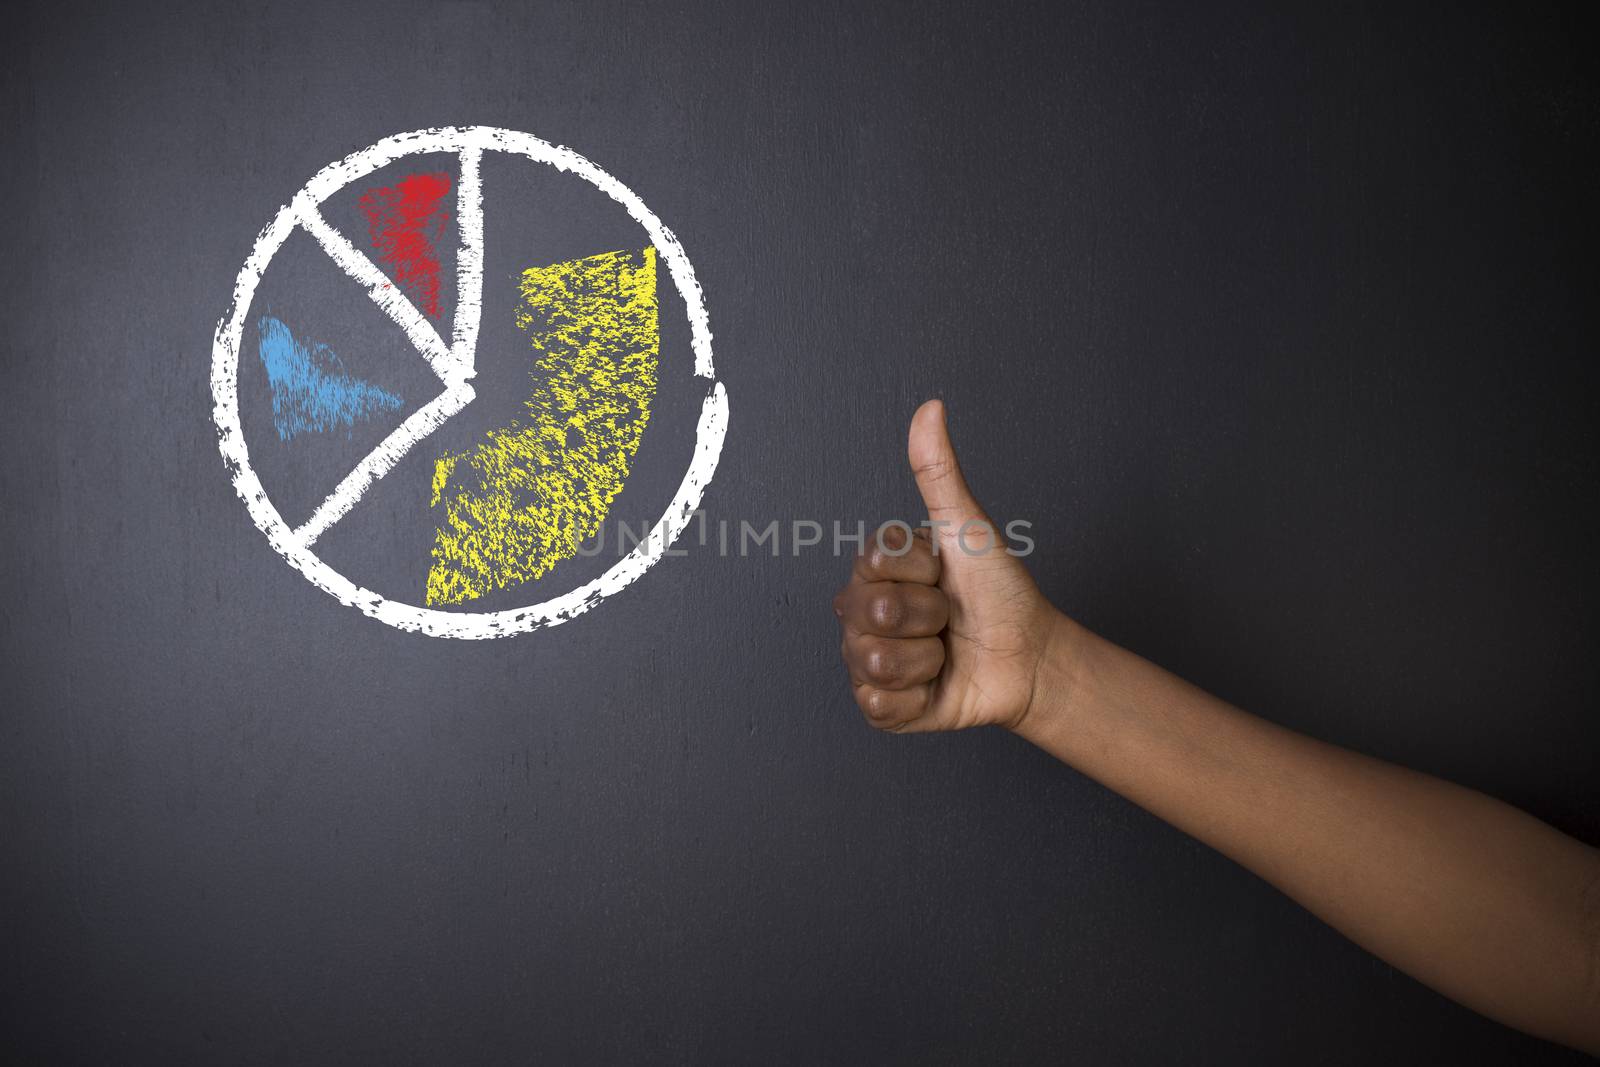 South African or African American teacher or student with thumbs up against a blackboard background with a chalk pie graph or chart